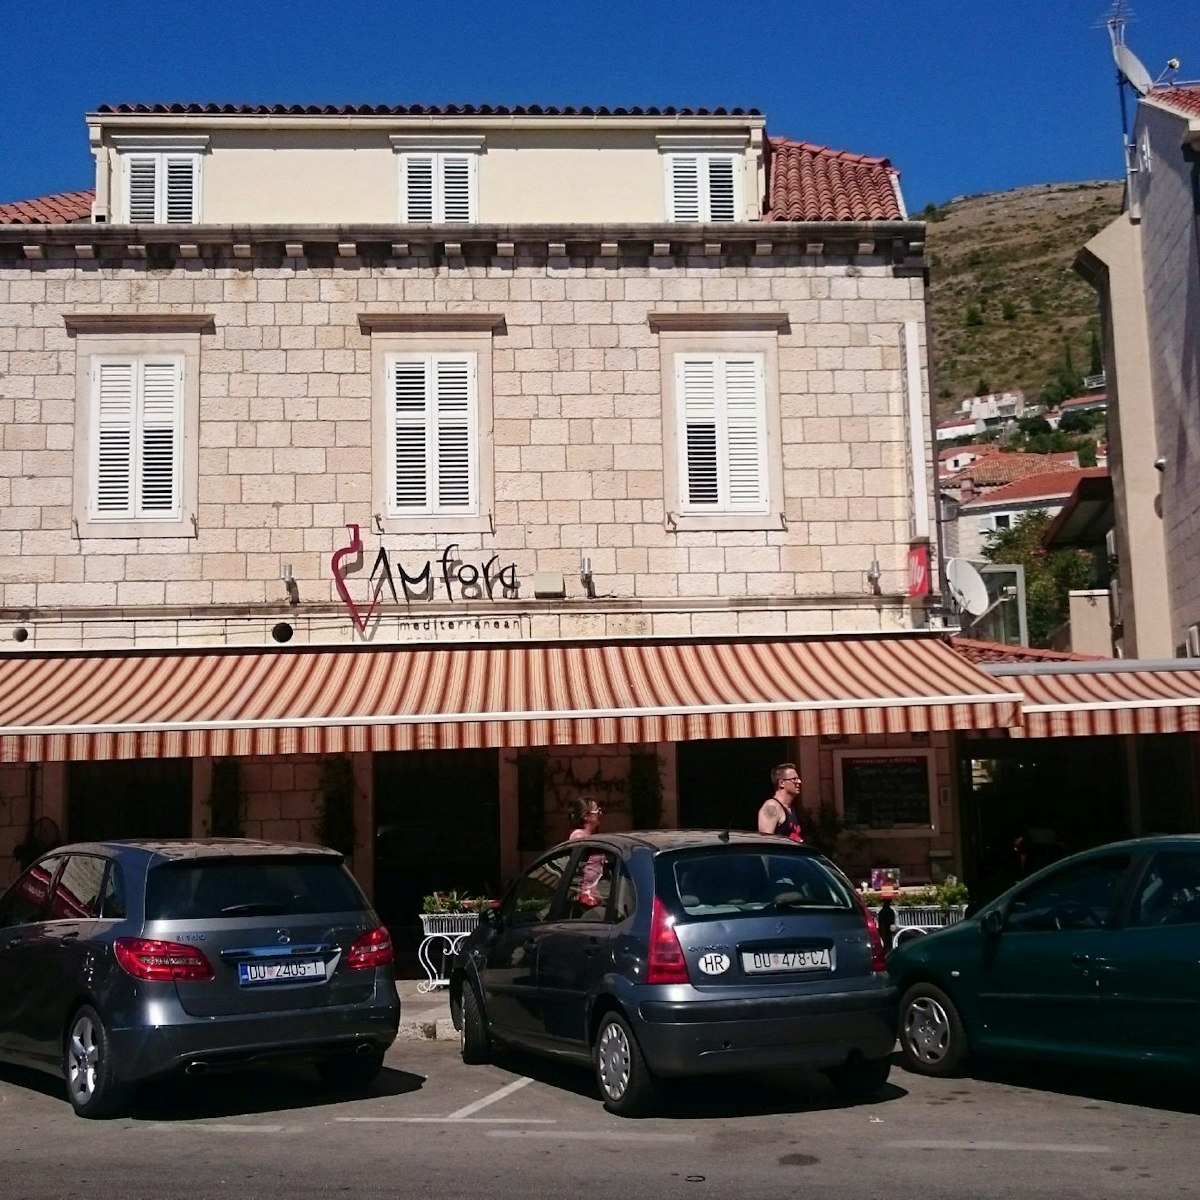 Amfora restaurant viewed from across the road